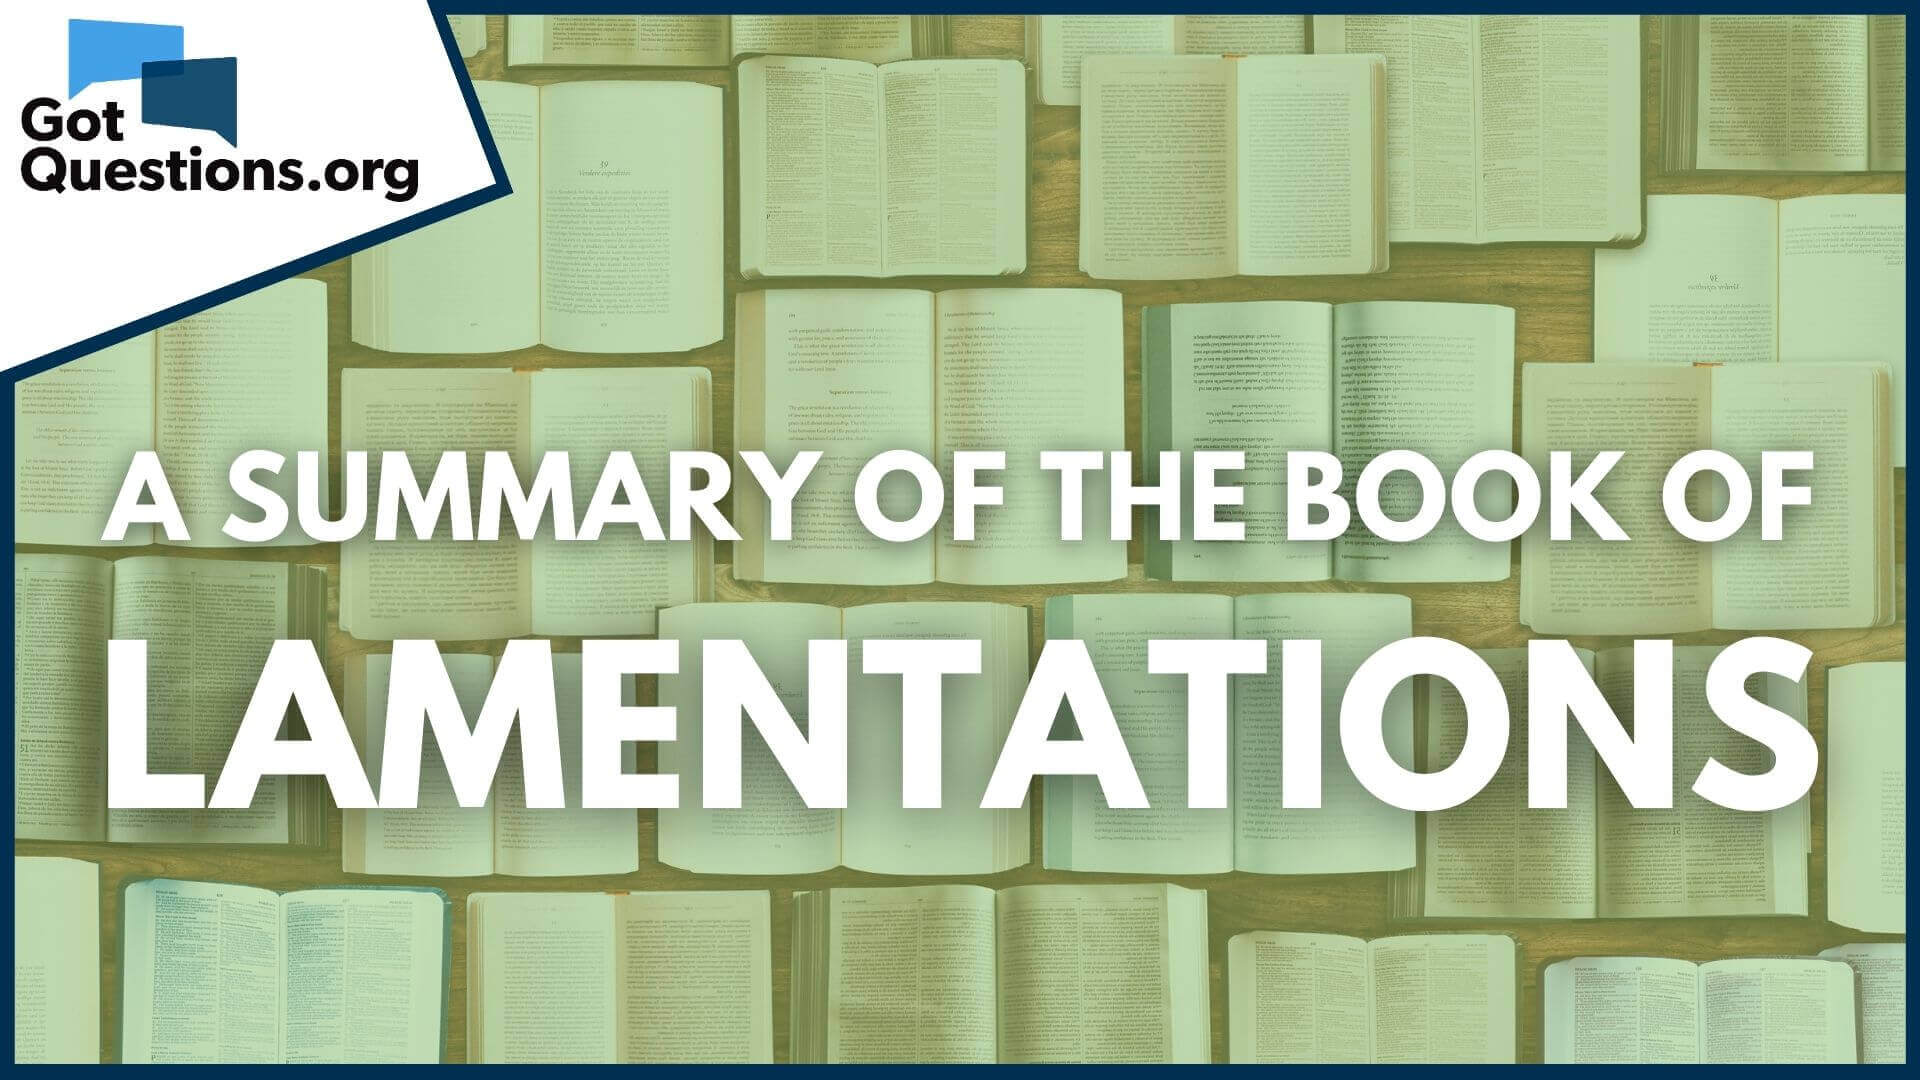 Can you summarize the Book of Lamentations?